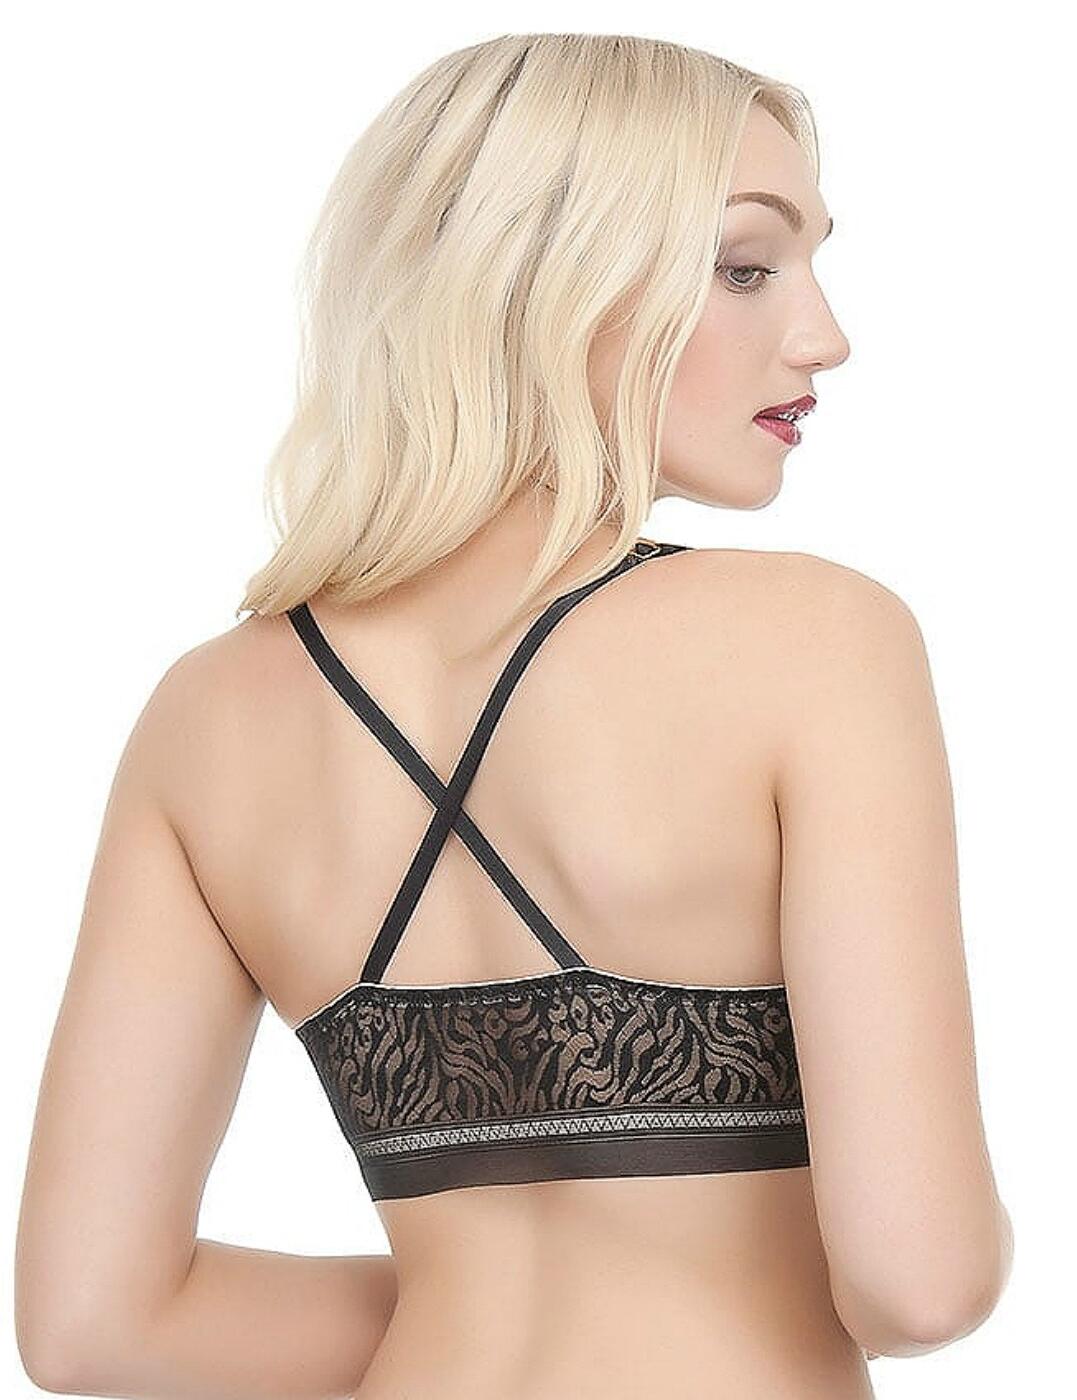 037901 Ultimo Briar Non-Wired Plunge Crop Top DD+ Cup - 037901 Licorice